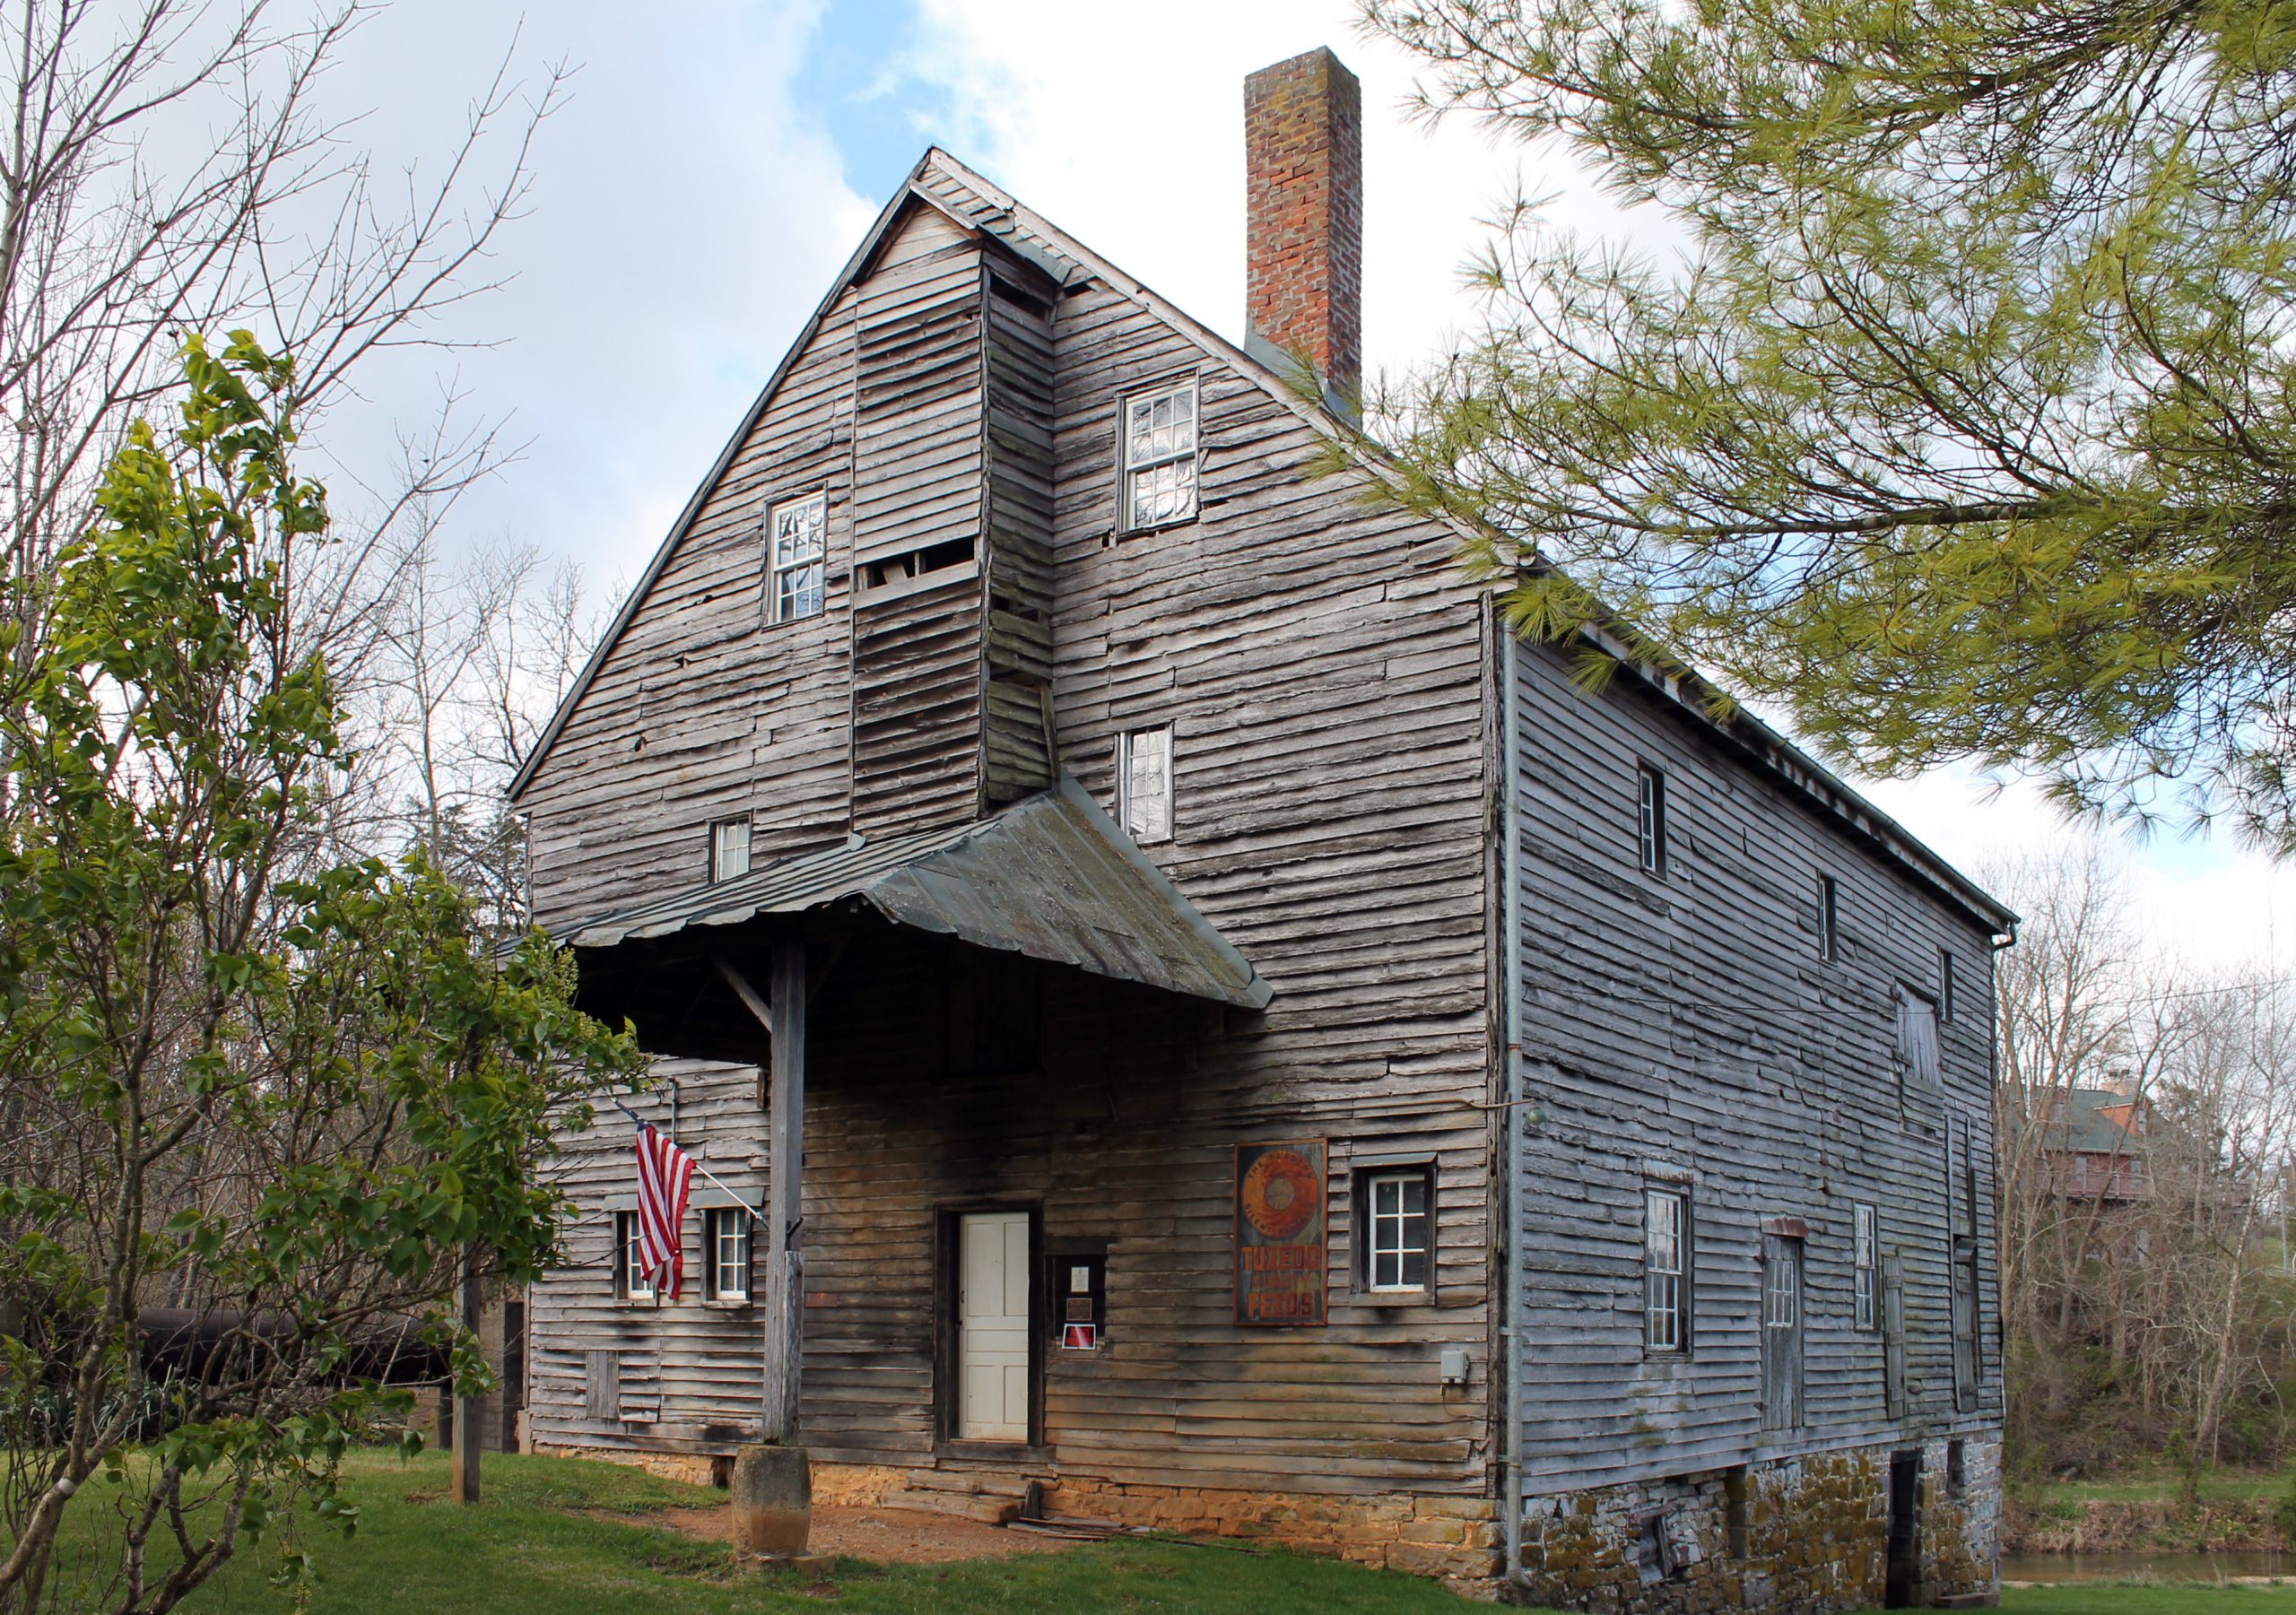 081-0159_HaysCreekMill_2016_exterior_front_oblique_VLR_Online-scaled